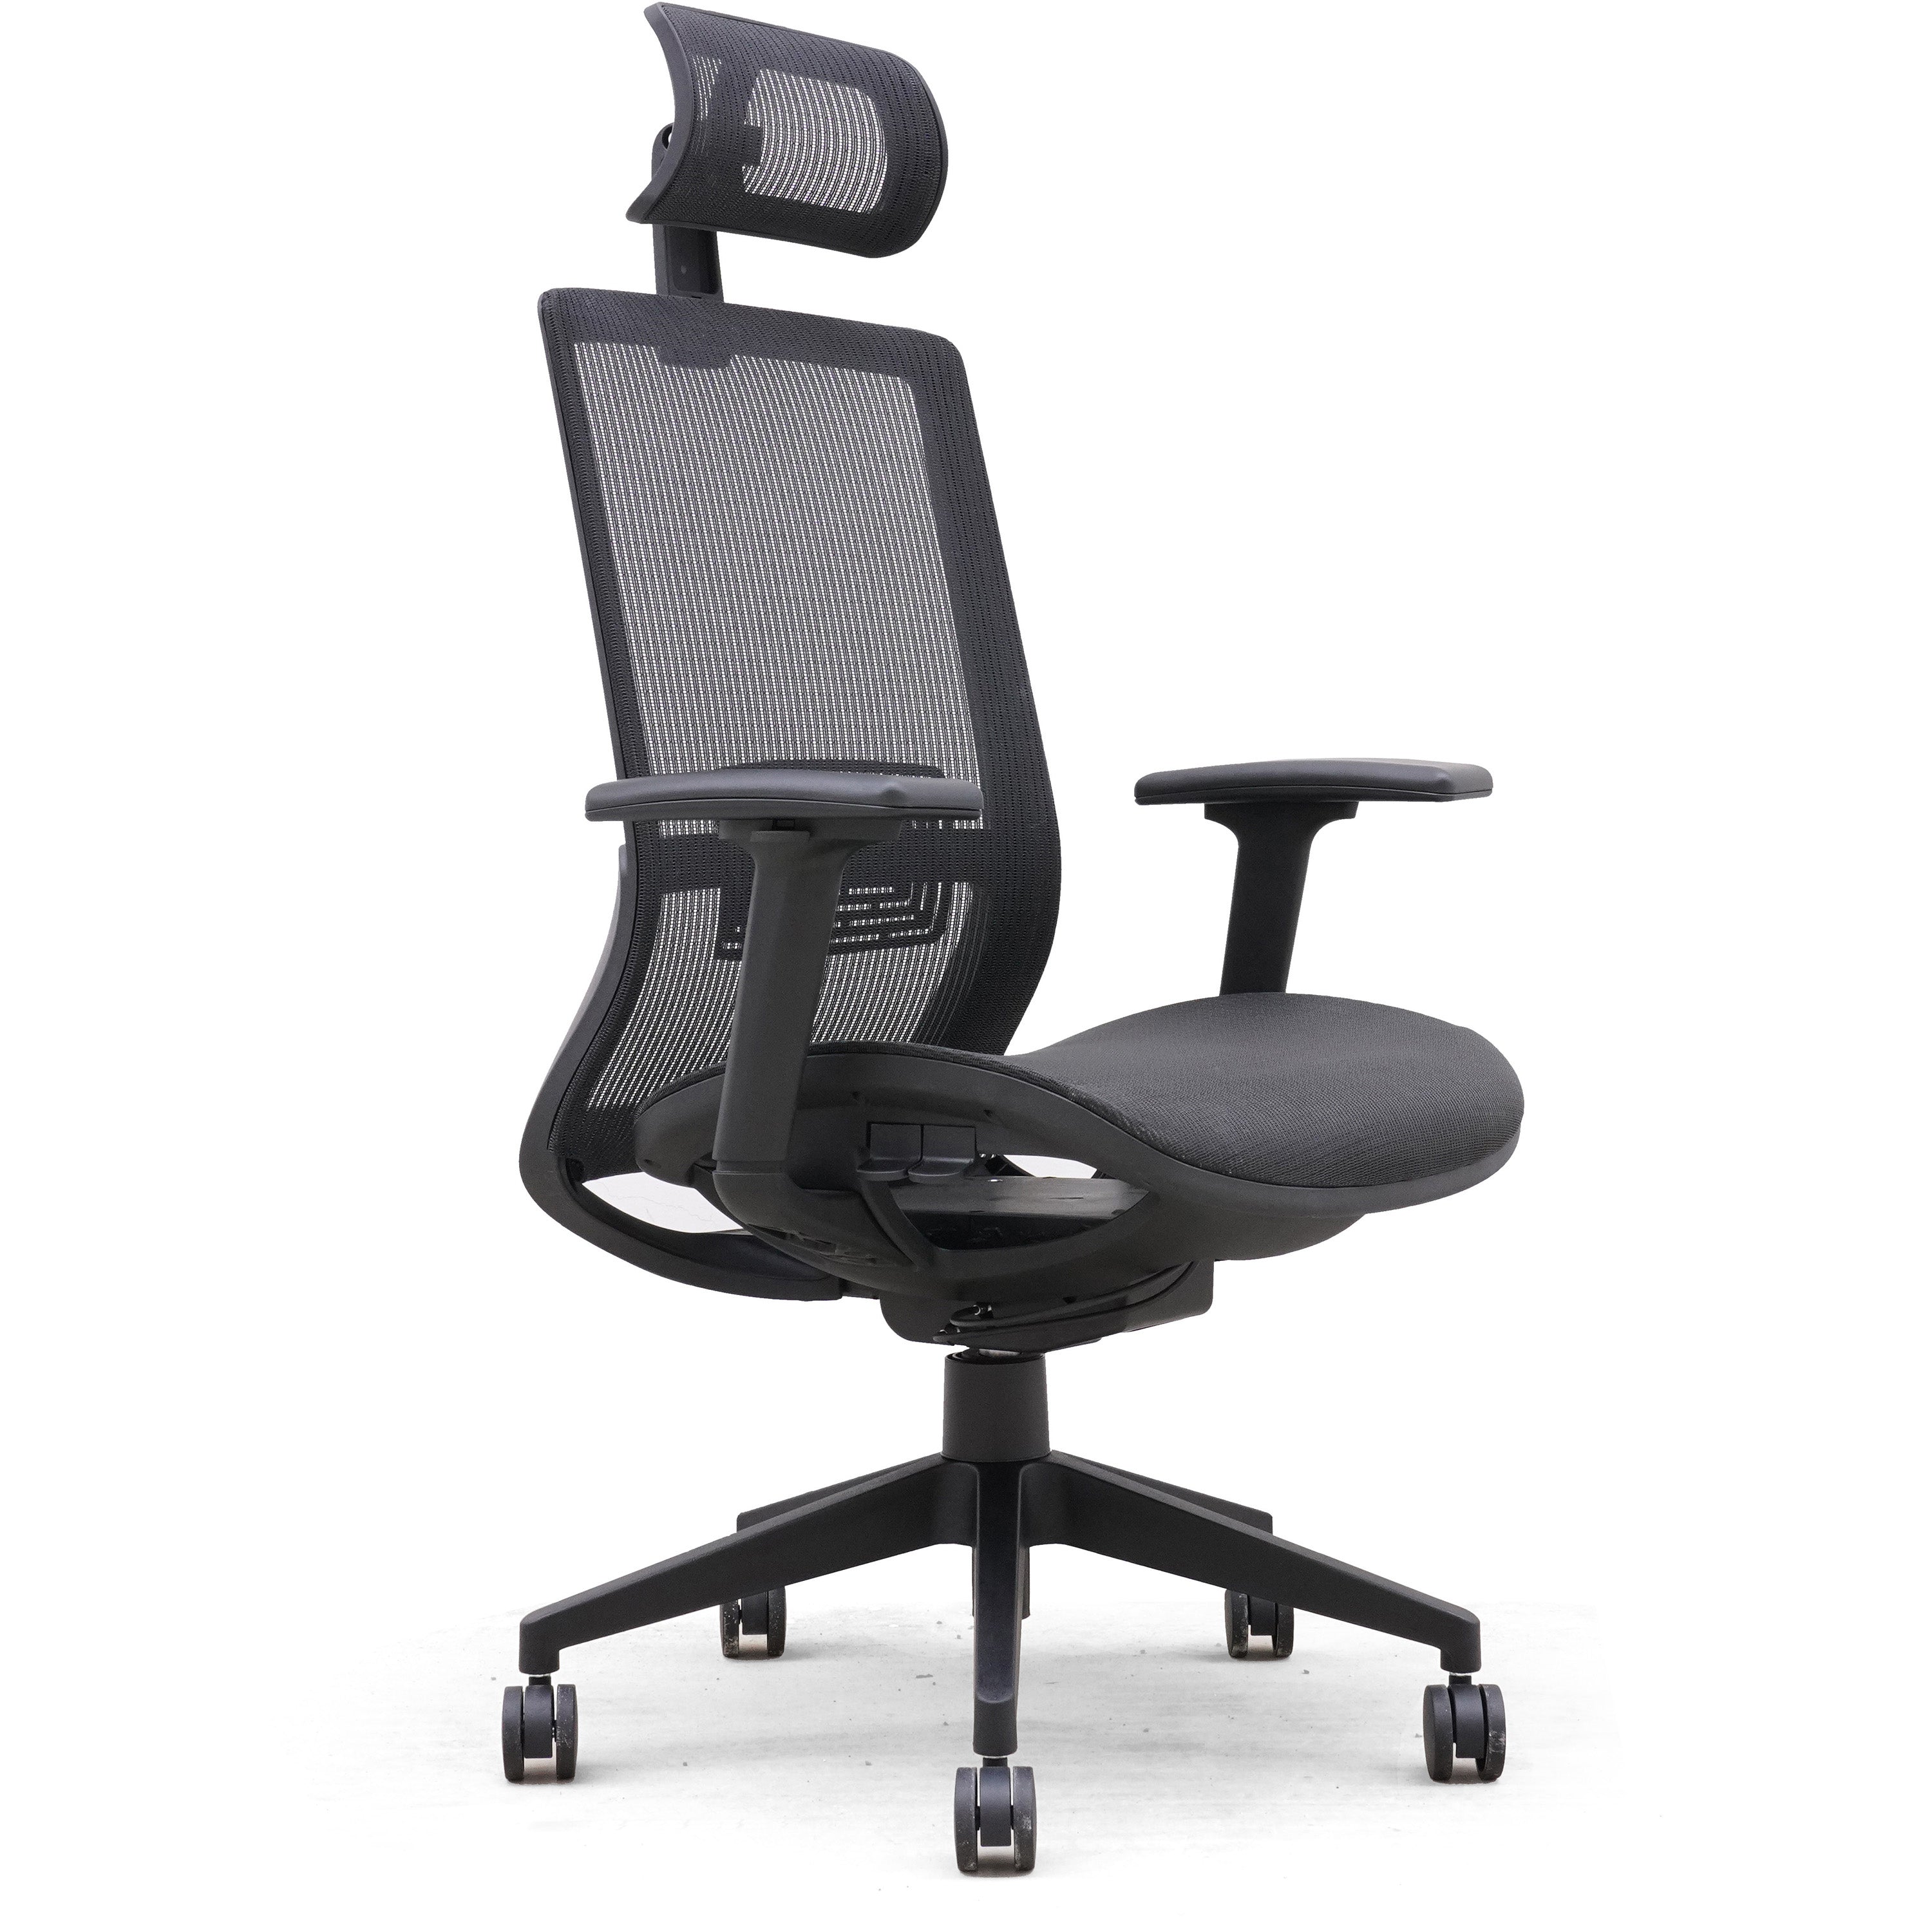 Mesh Task Chair with Headrest, "The Breeze", B6033-HR